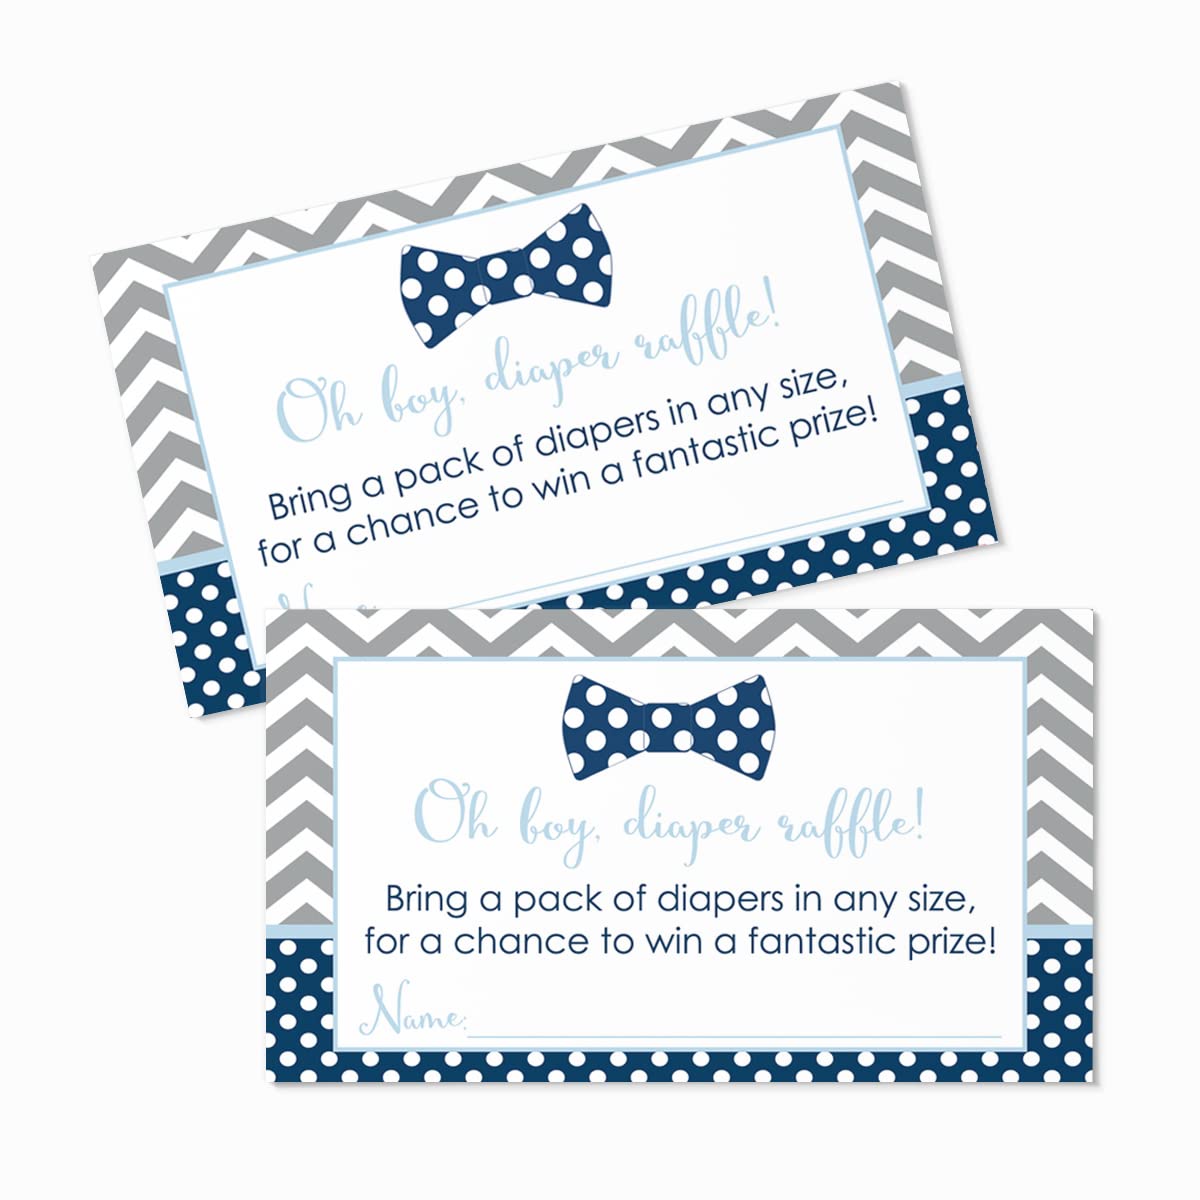 Bow Tie Diaper Raffle Tickets (25 Pack) Baby Shower Games Boys – Invitation Insert Cards Fill-In for Prize Drawings